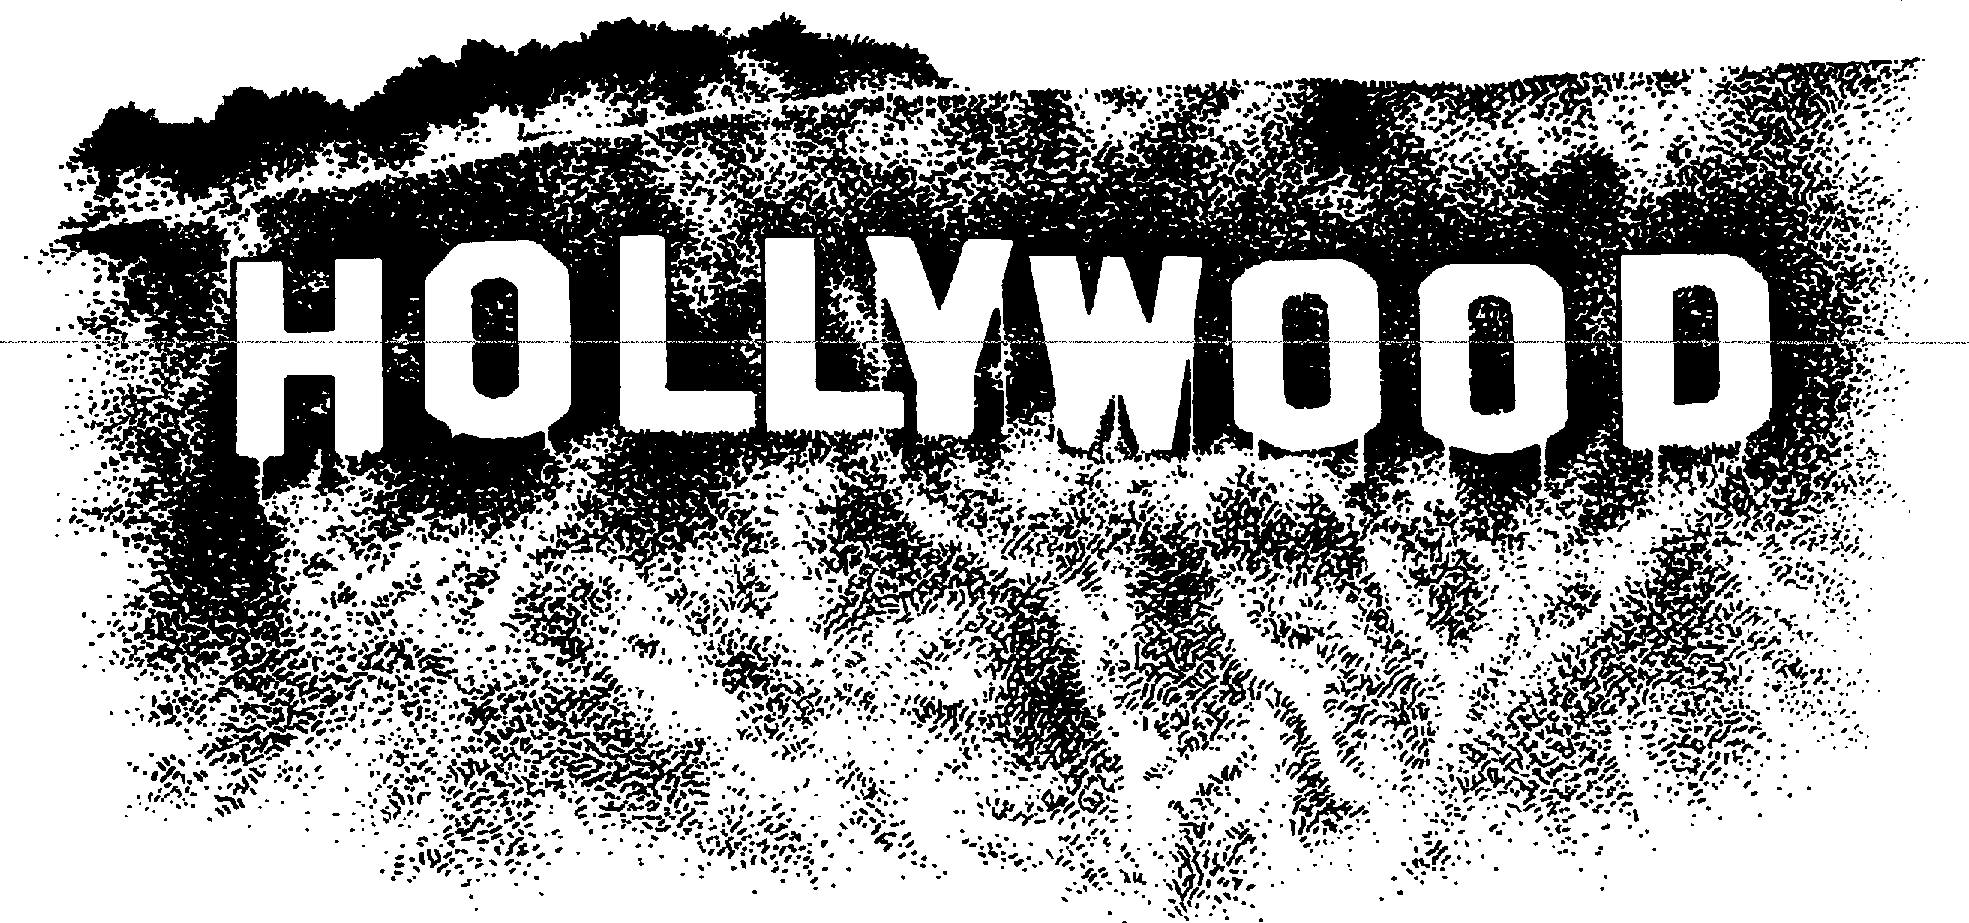 hollywood sign clipart - Google Search